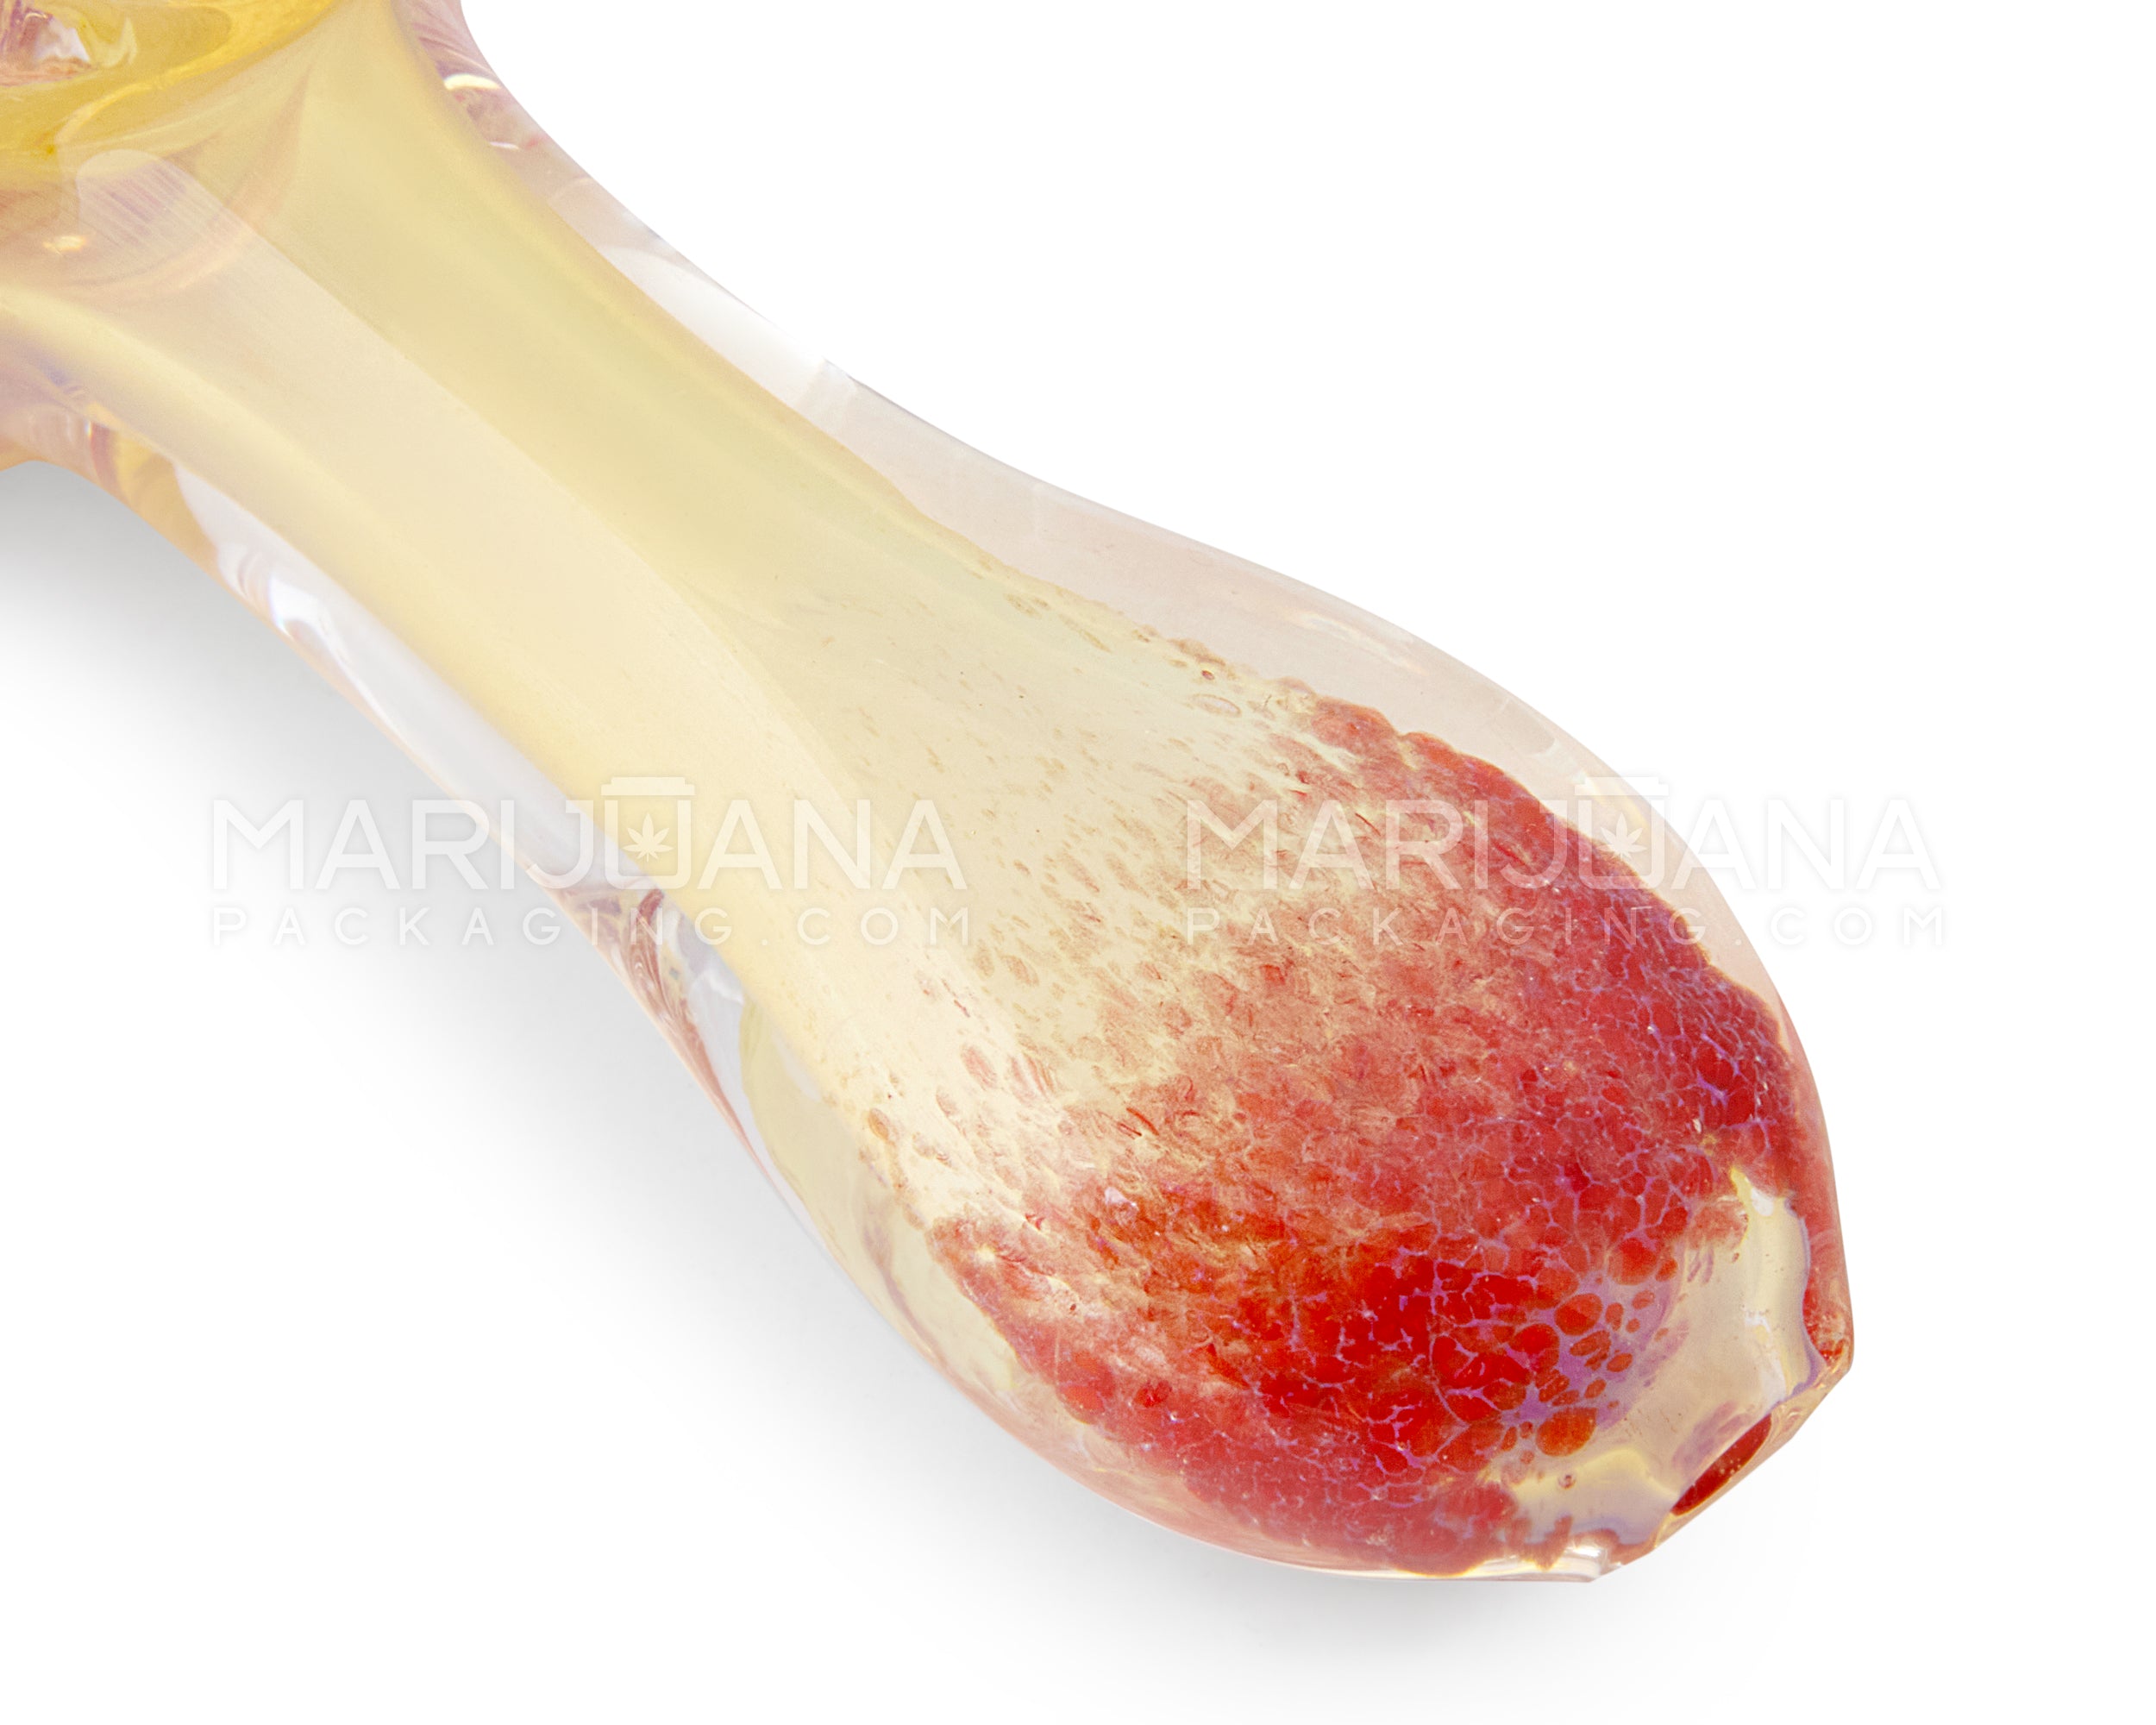 Frit & Gold Fumed Spoon Hand Pipe | 3.5in Long - Glass - Assorted